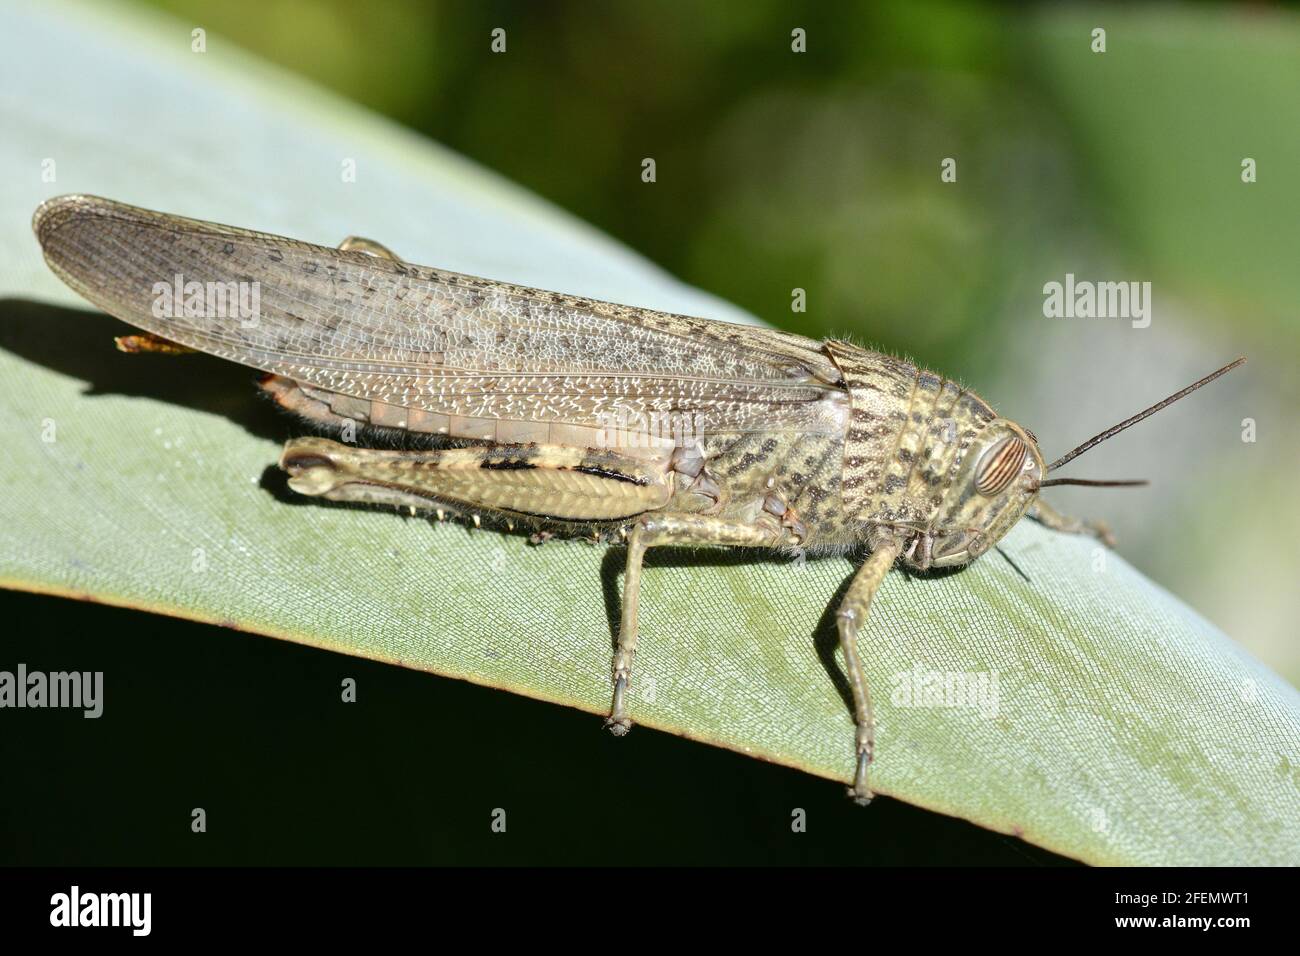 France, south-eastern,  the grasshopper move by jumping with its very muscular hind legs, it has long antennae. Stock Photo